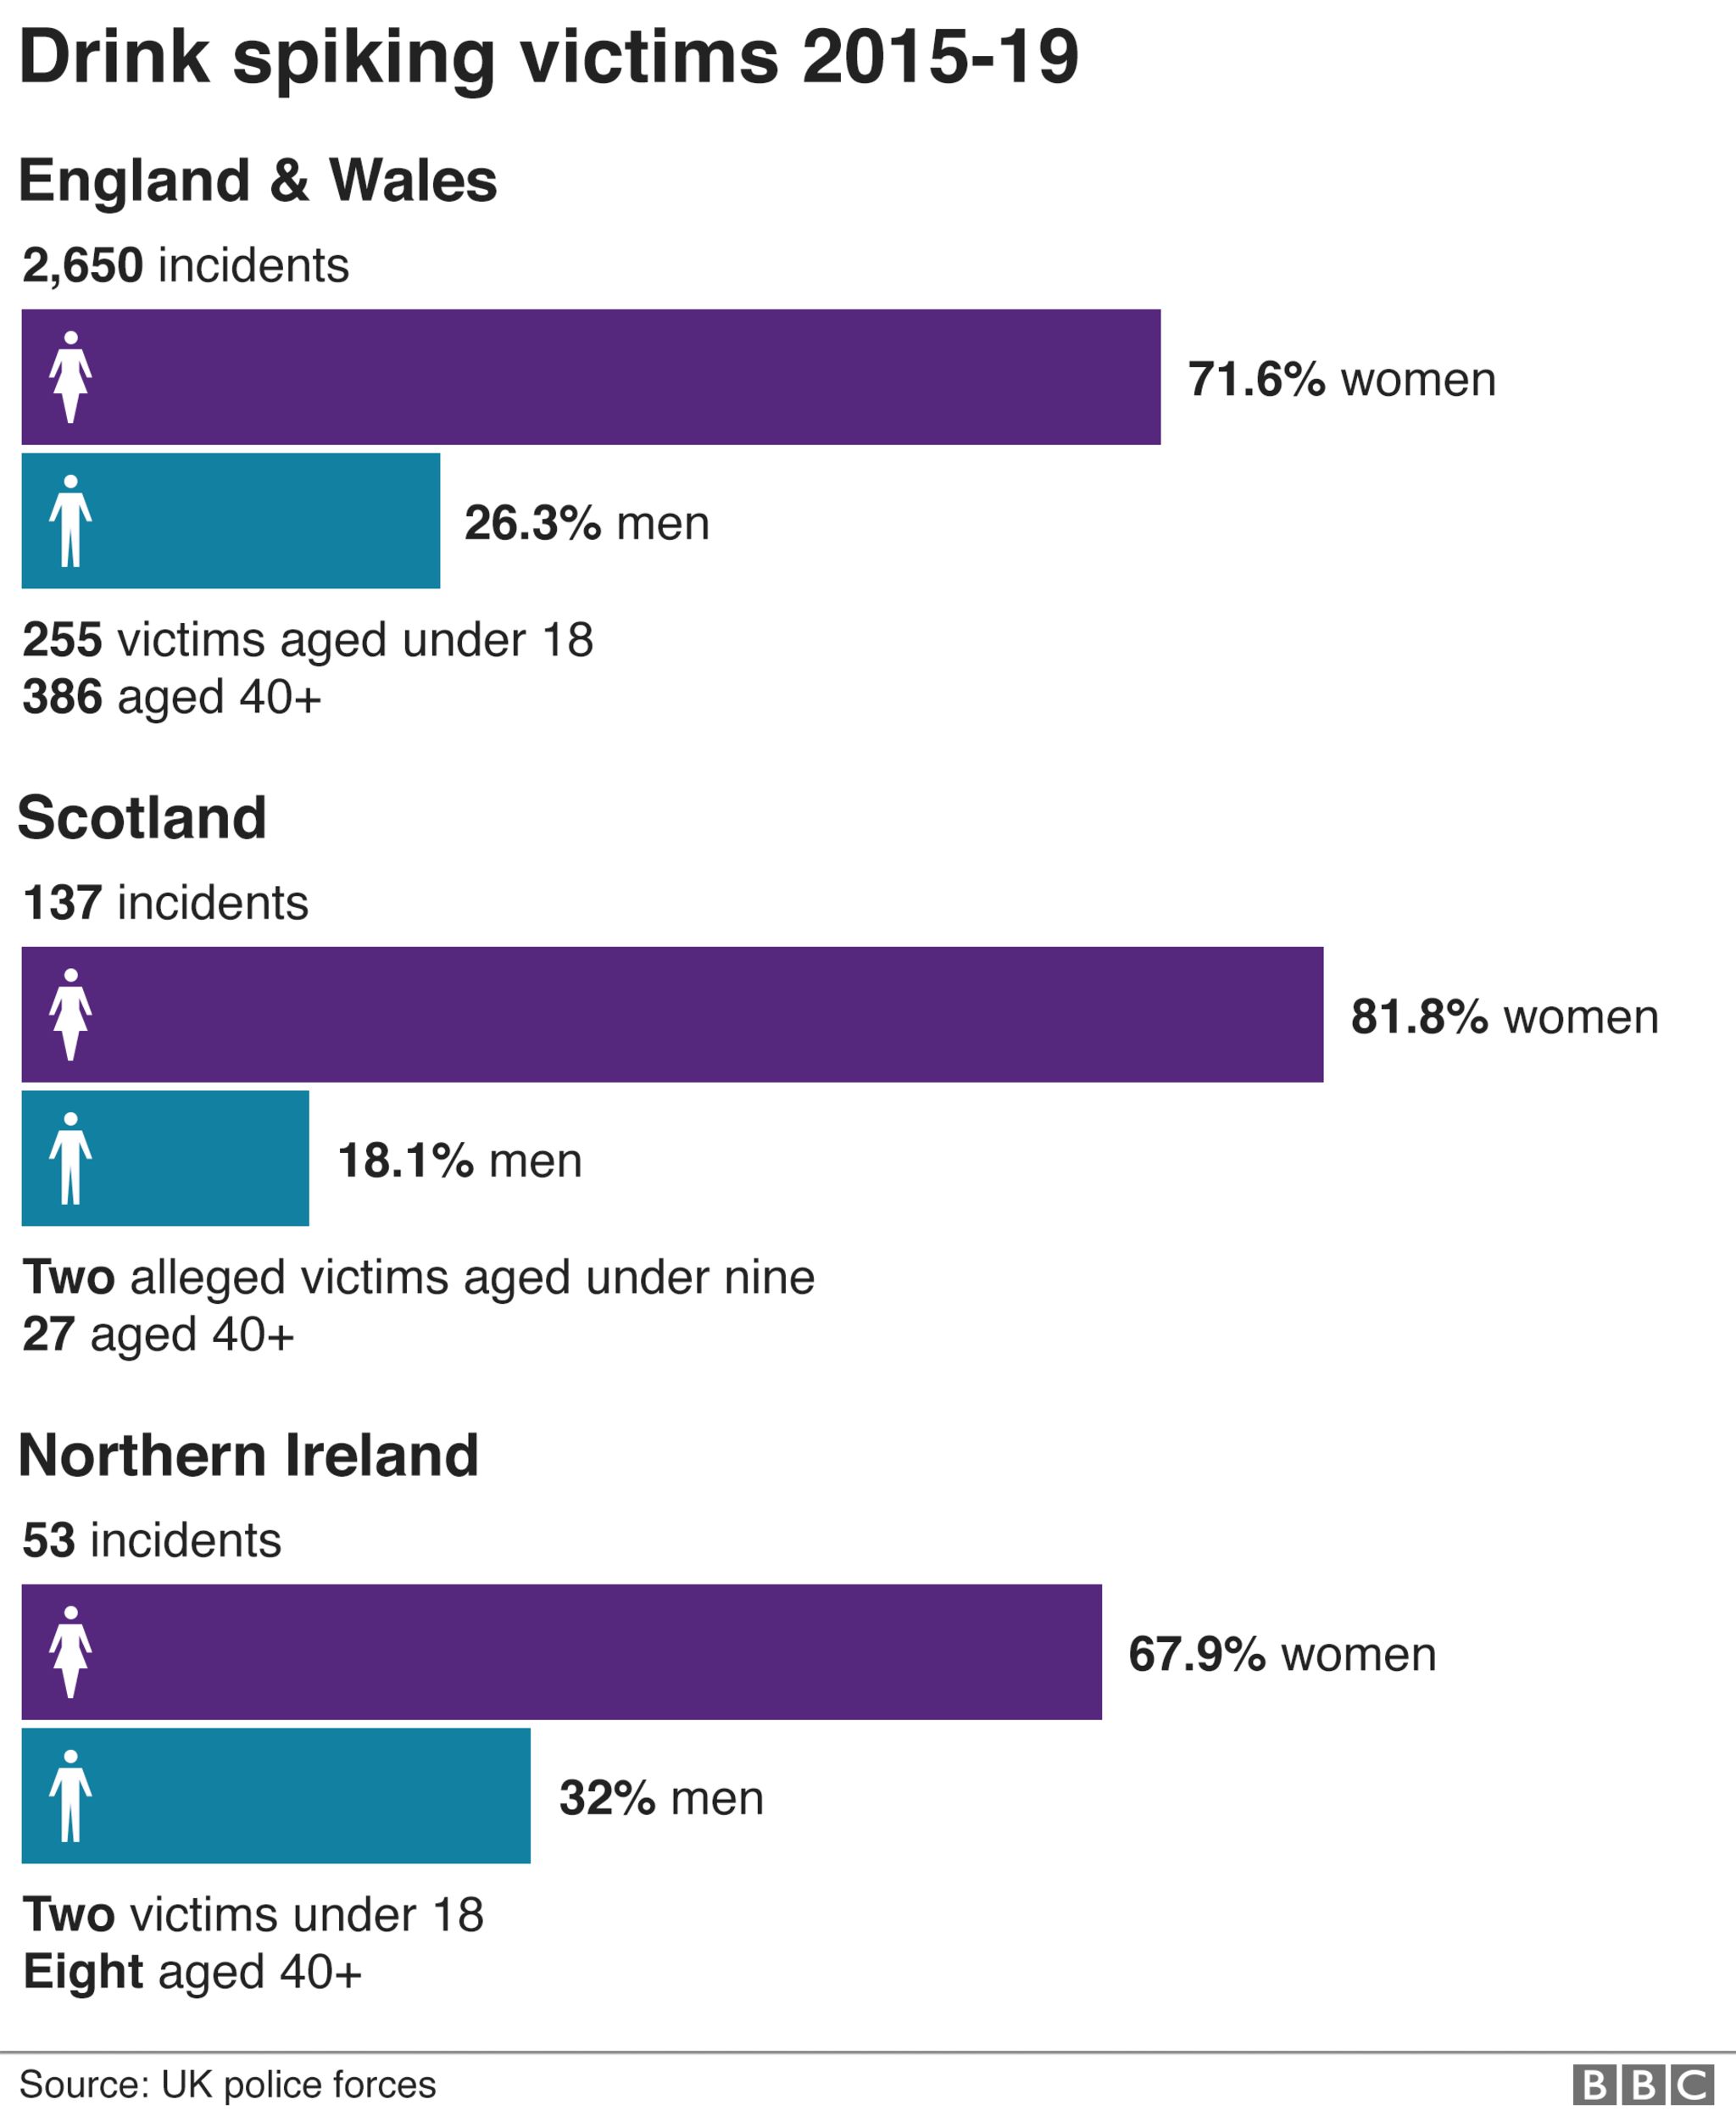 Bar graph showing the numbers of drink spiking victims between 2015 and 2019 in England and Wales. It shows of the 2,650 incidents 71.6% were women and 26.3% were men.